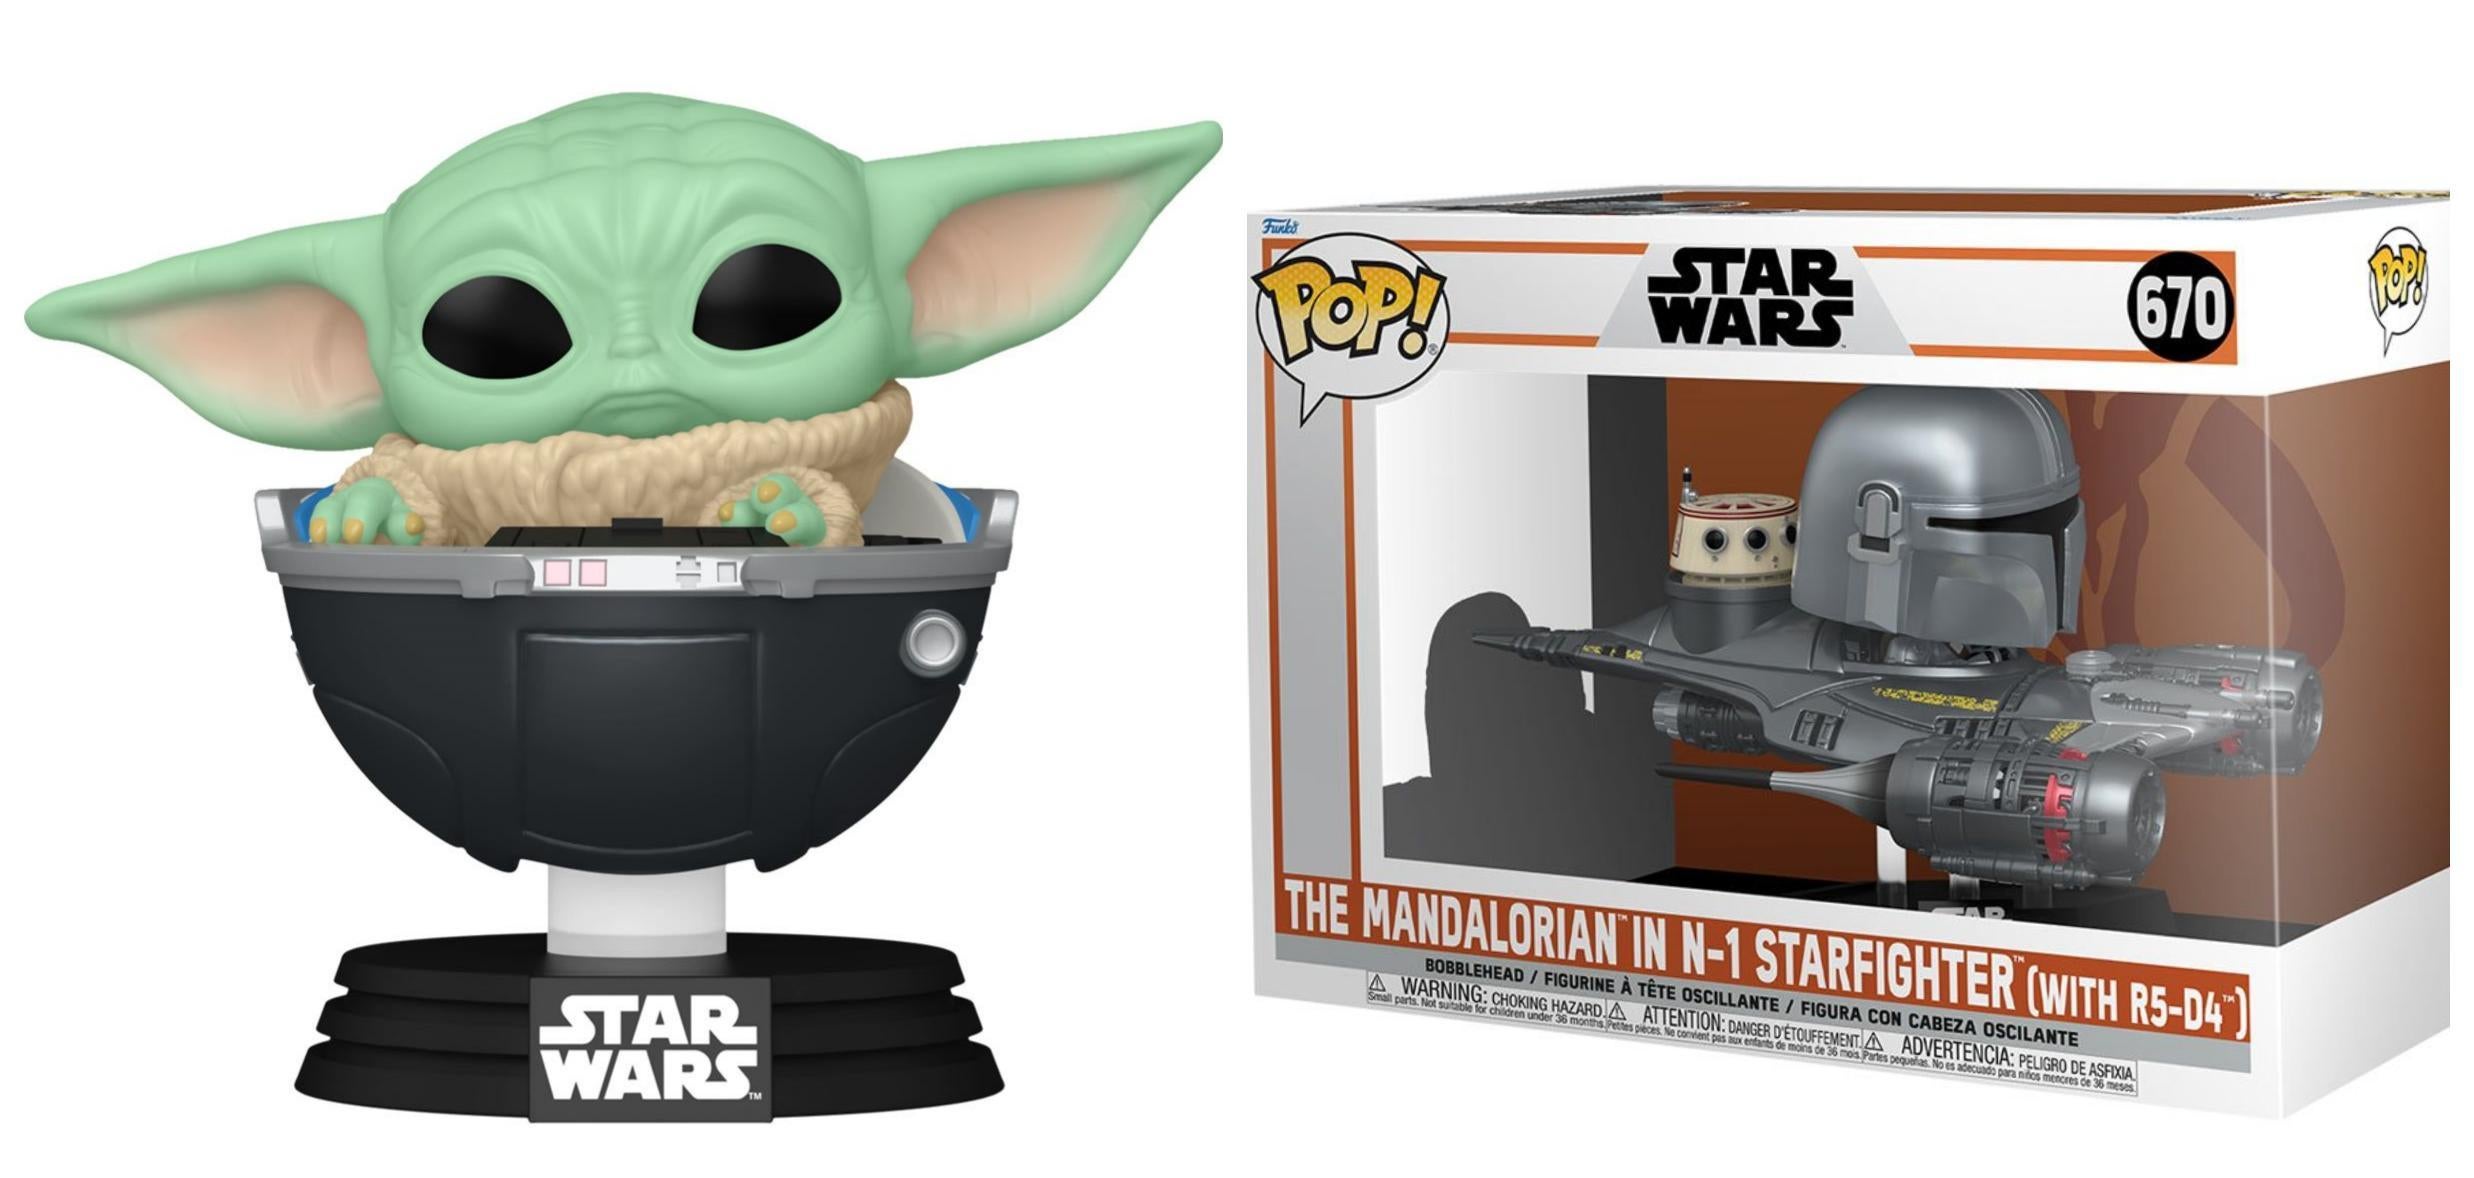 New Funko Pop! Releases from The Mandalorian Season 3 Available